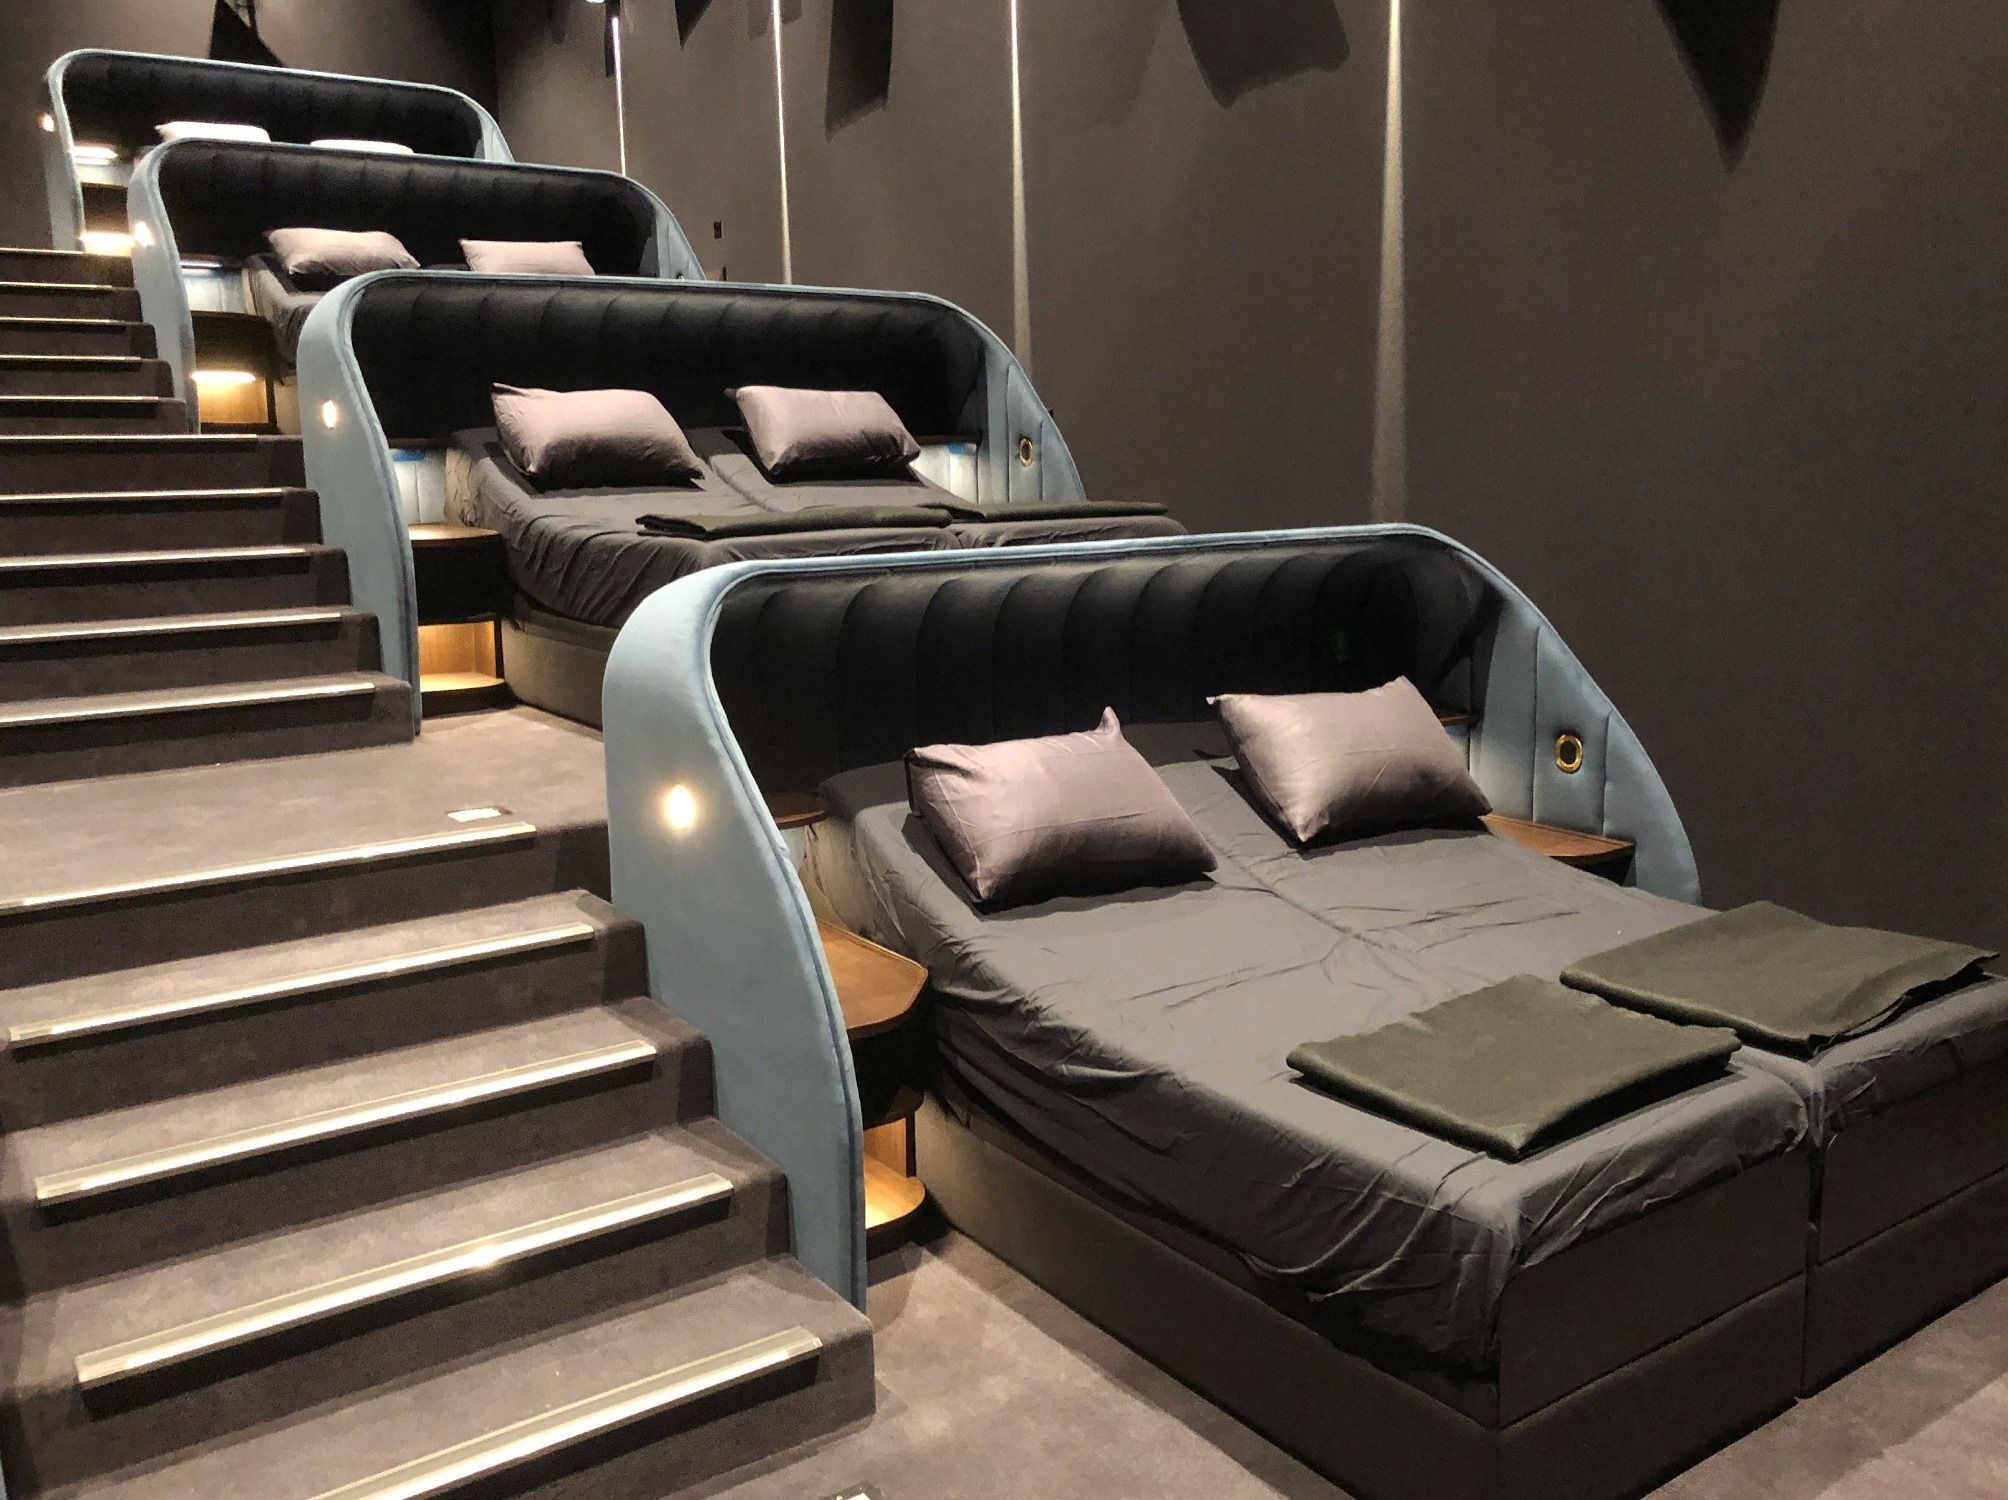 Cinema Pathé in Switzerland Has the Ultimate Movie Theater Beds